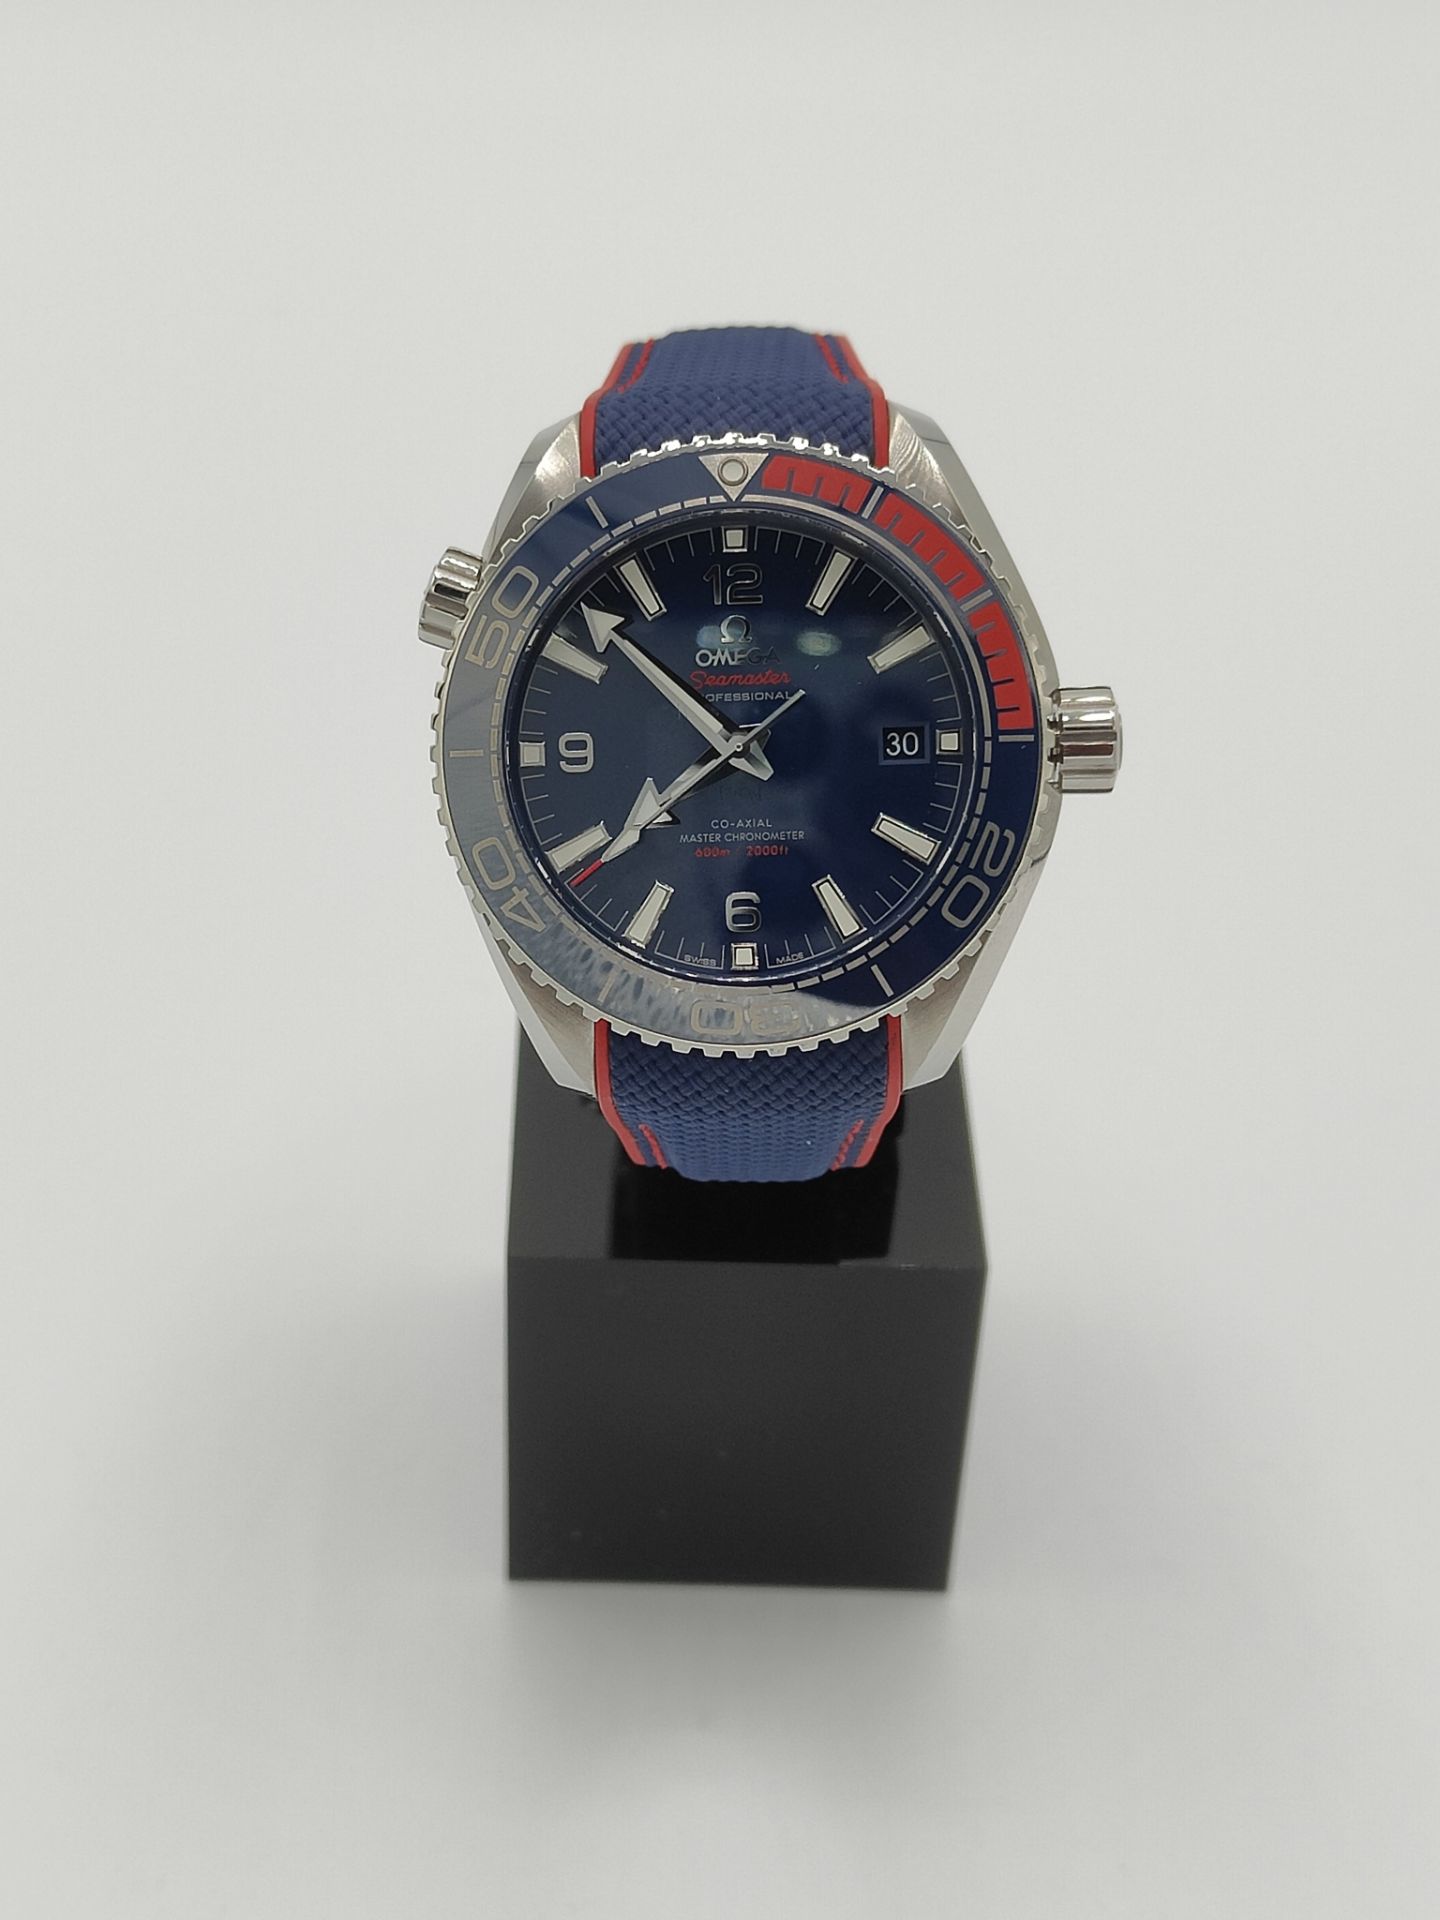 Omega Seamaster Planet Ocean Pyeongchang 2018 Limited Edition Watch